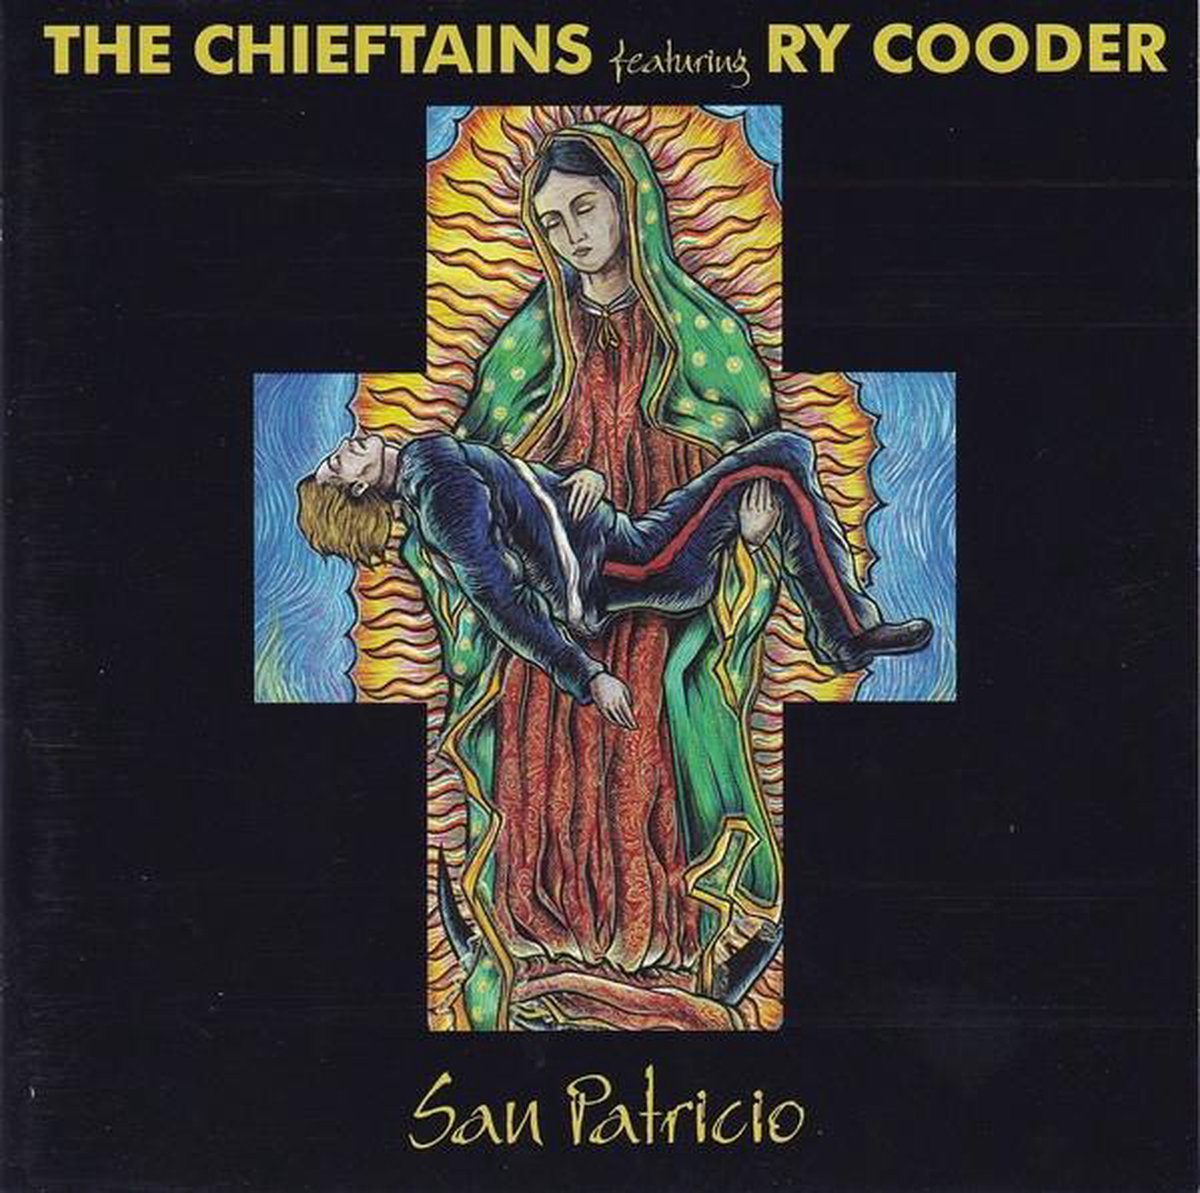 San Patricio - The Feat. Ry Cooder Chieftains